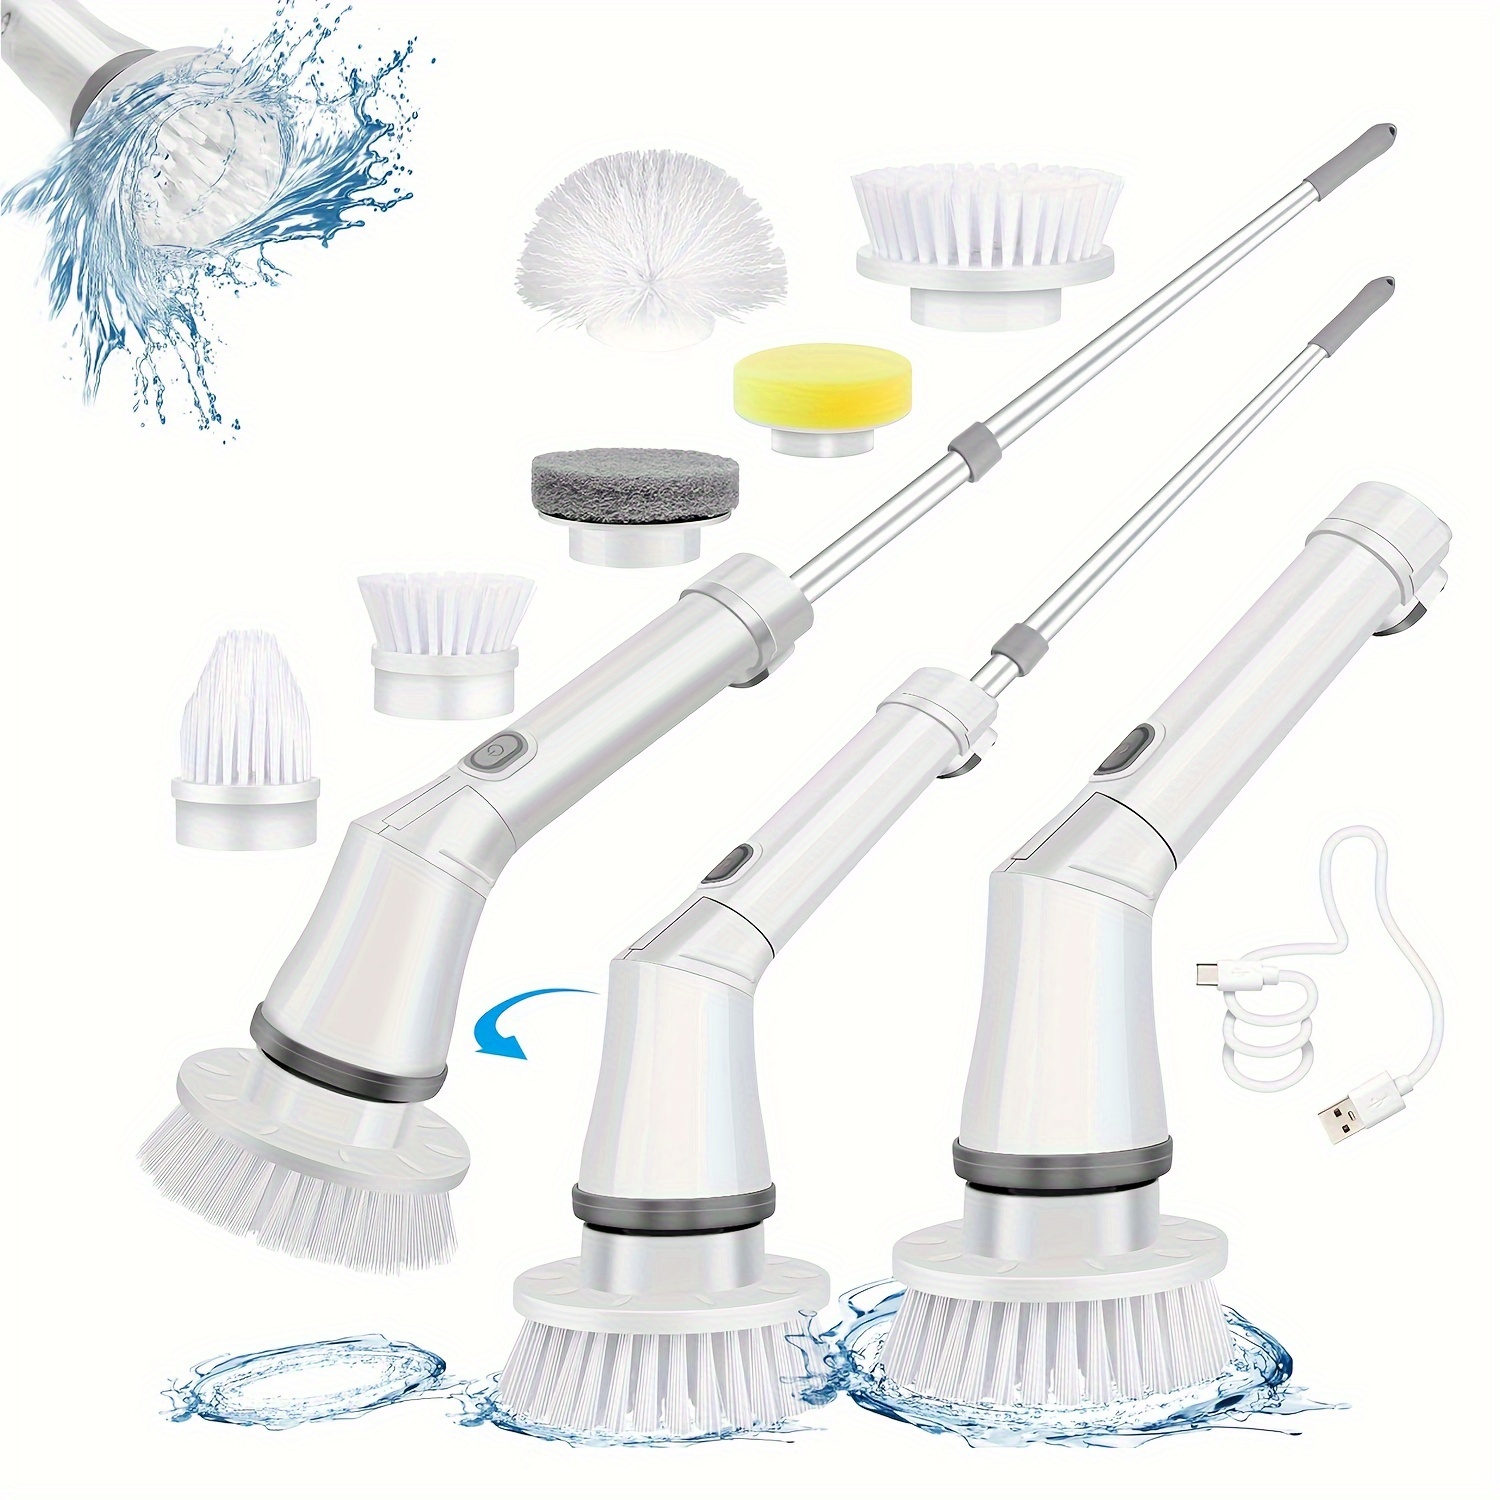 

Electric Spin Scrubber, Cordless Cleaning Brush With 2 Speeds & 6 Replaceable Brush Heads & Adjustable Extension Arm, For Daily/deep Cleaning, Scrubber For Bathroom, Kitchen, Car